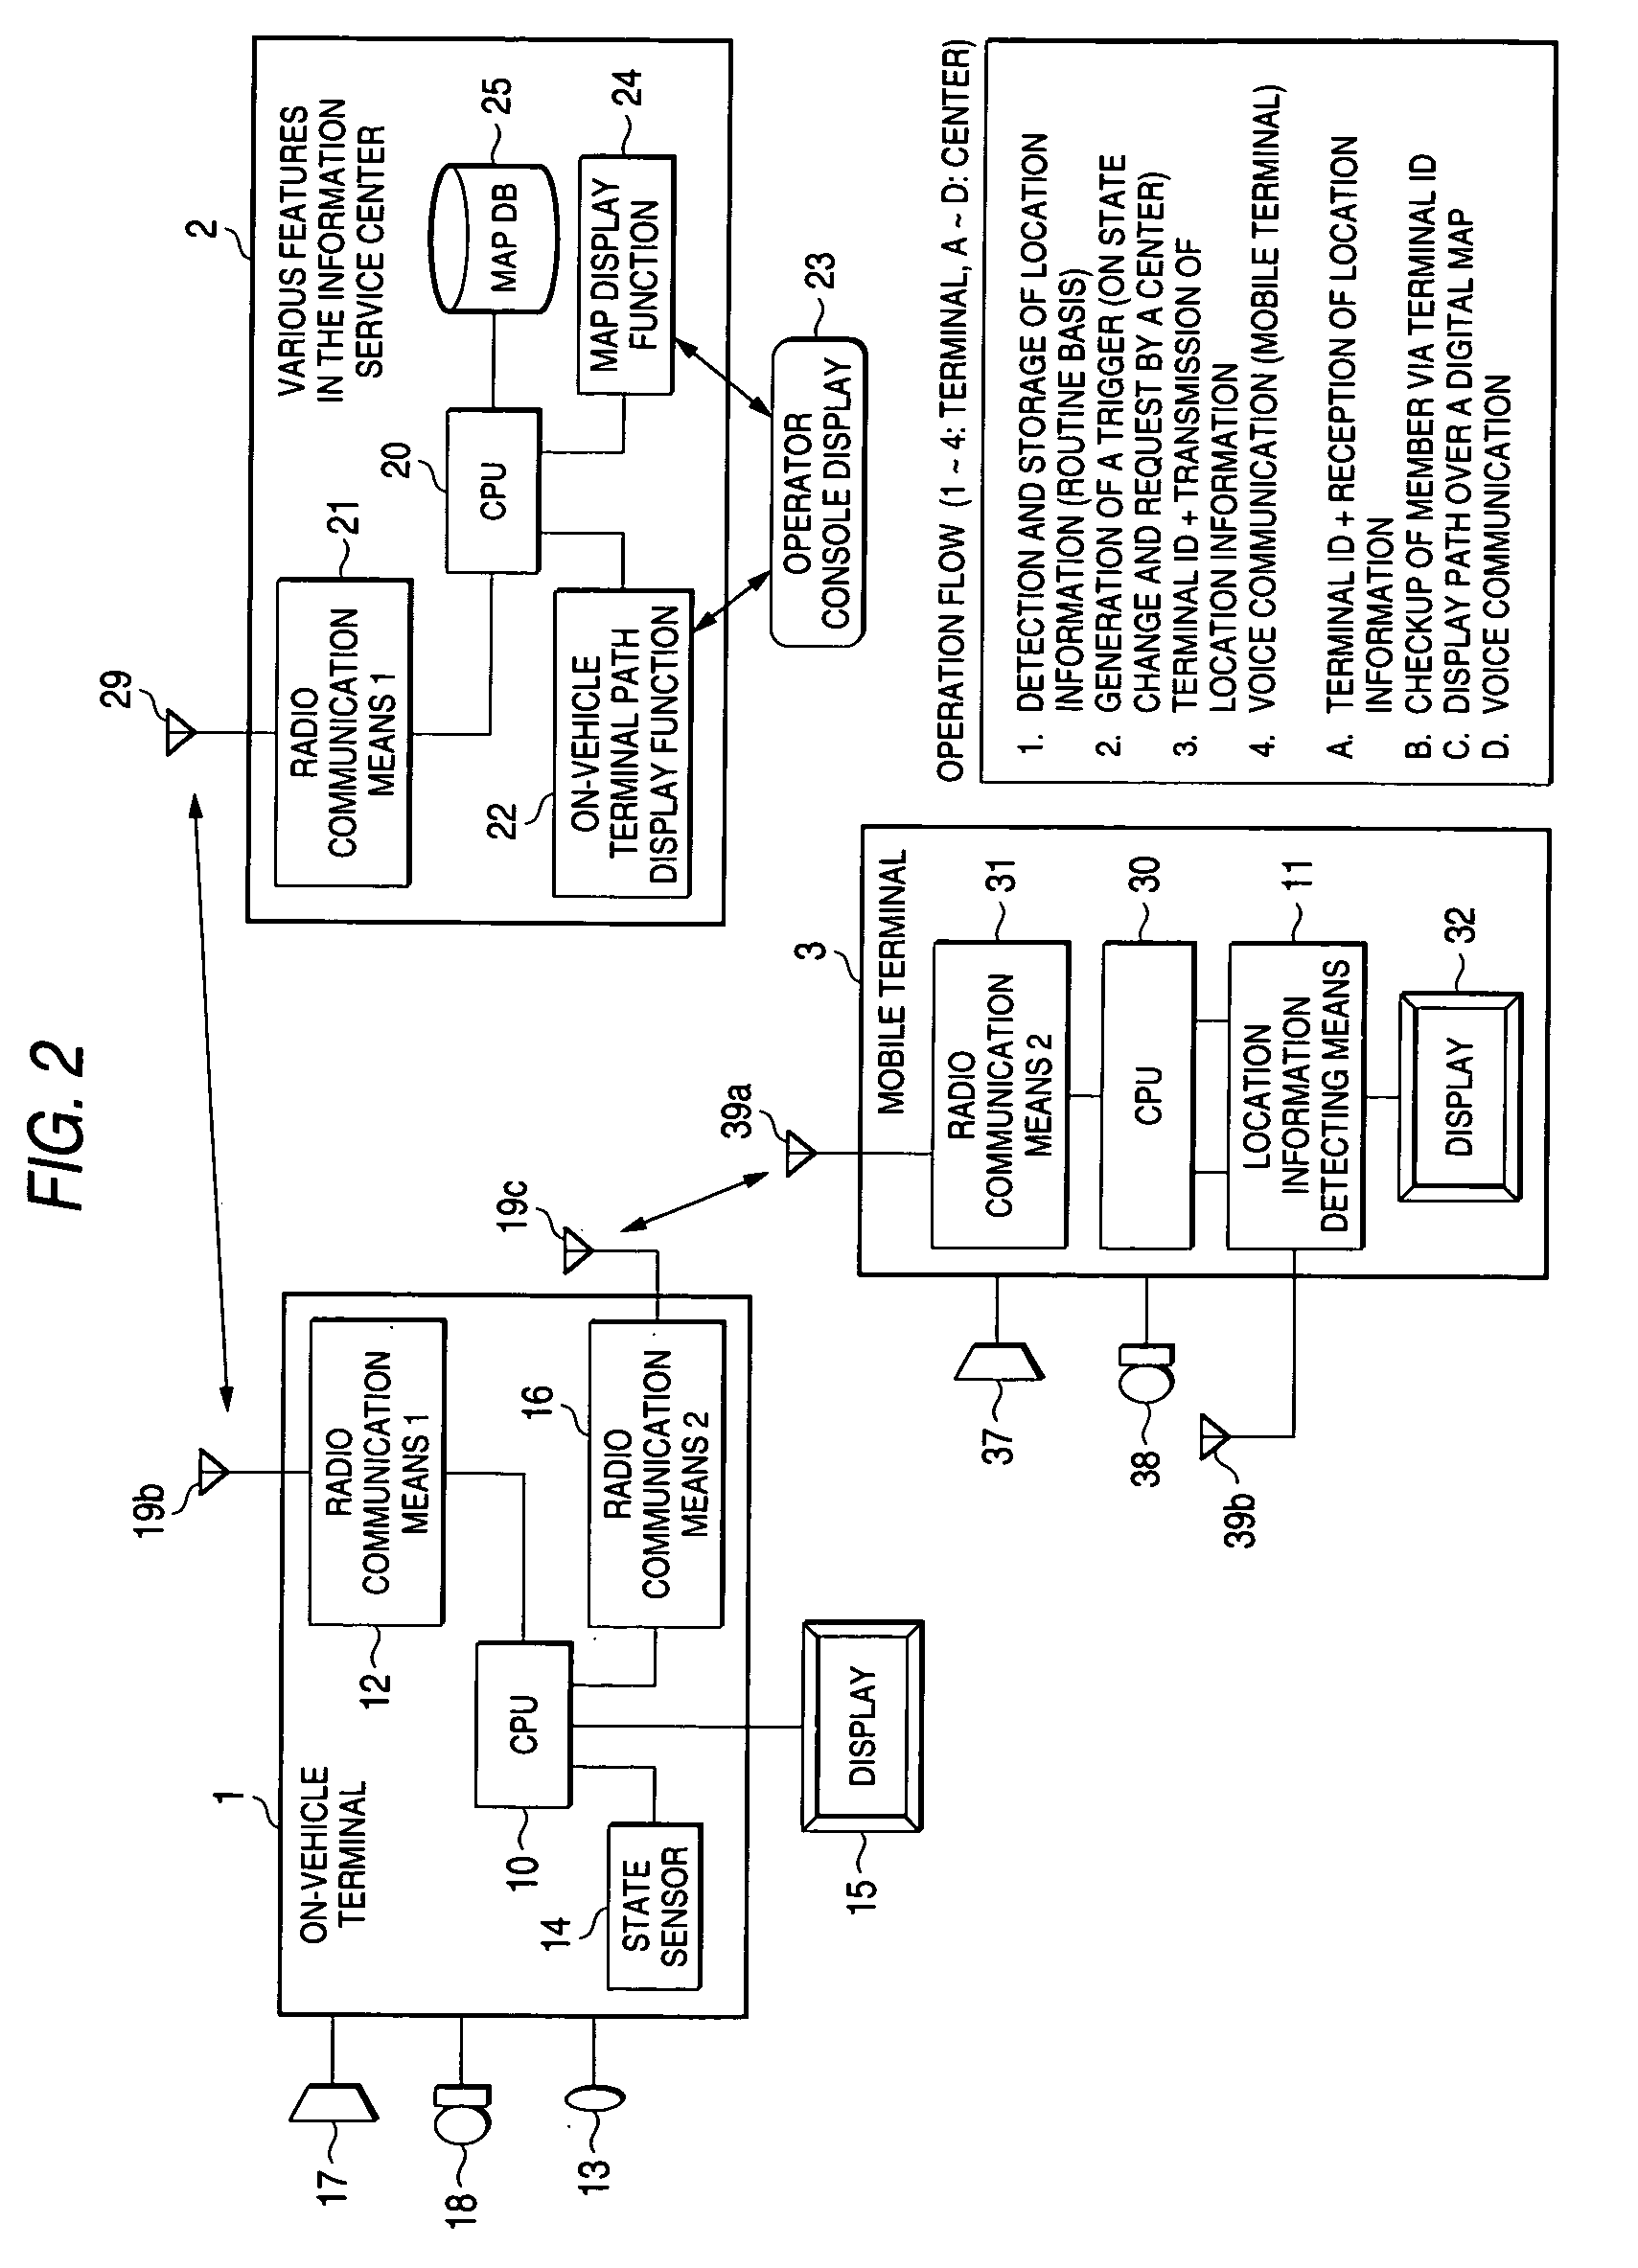 On-board communication terminal and information service center communicating with on-board communication terminal